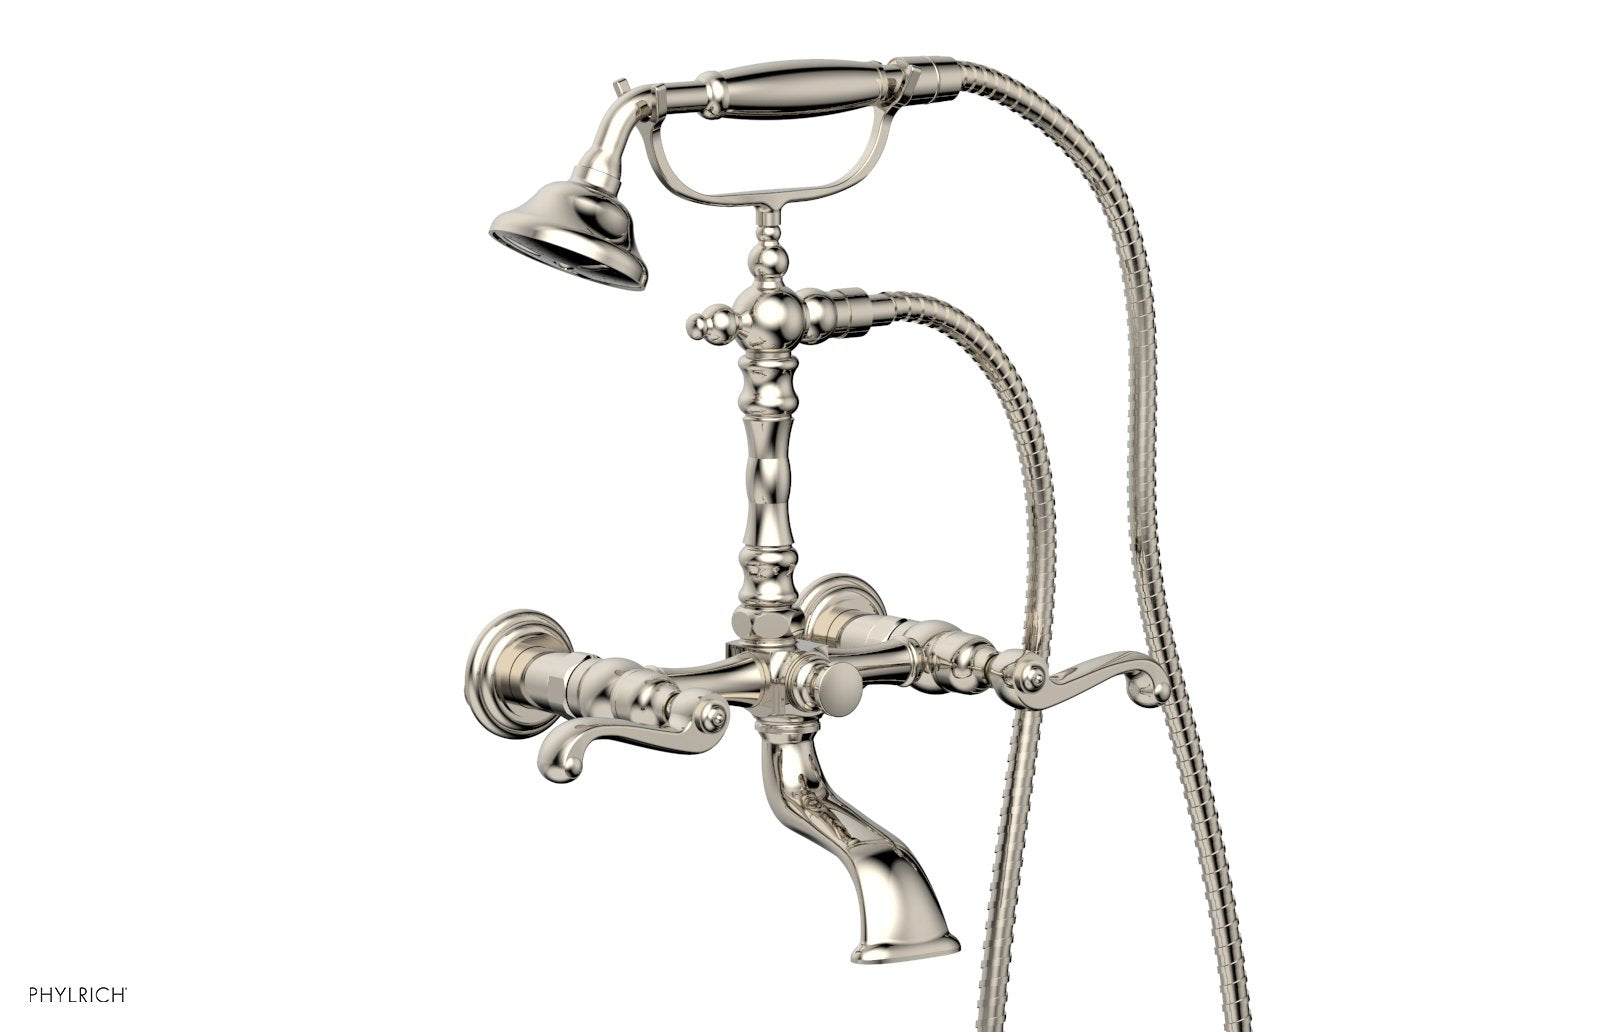 Phylrich REVERE & SAVANNAH Exposed Tub & Hand Shower - Curved Handle